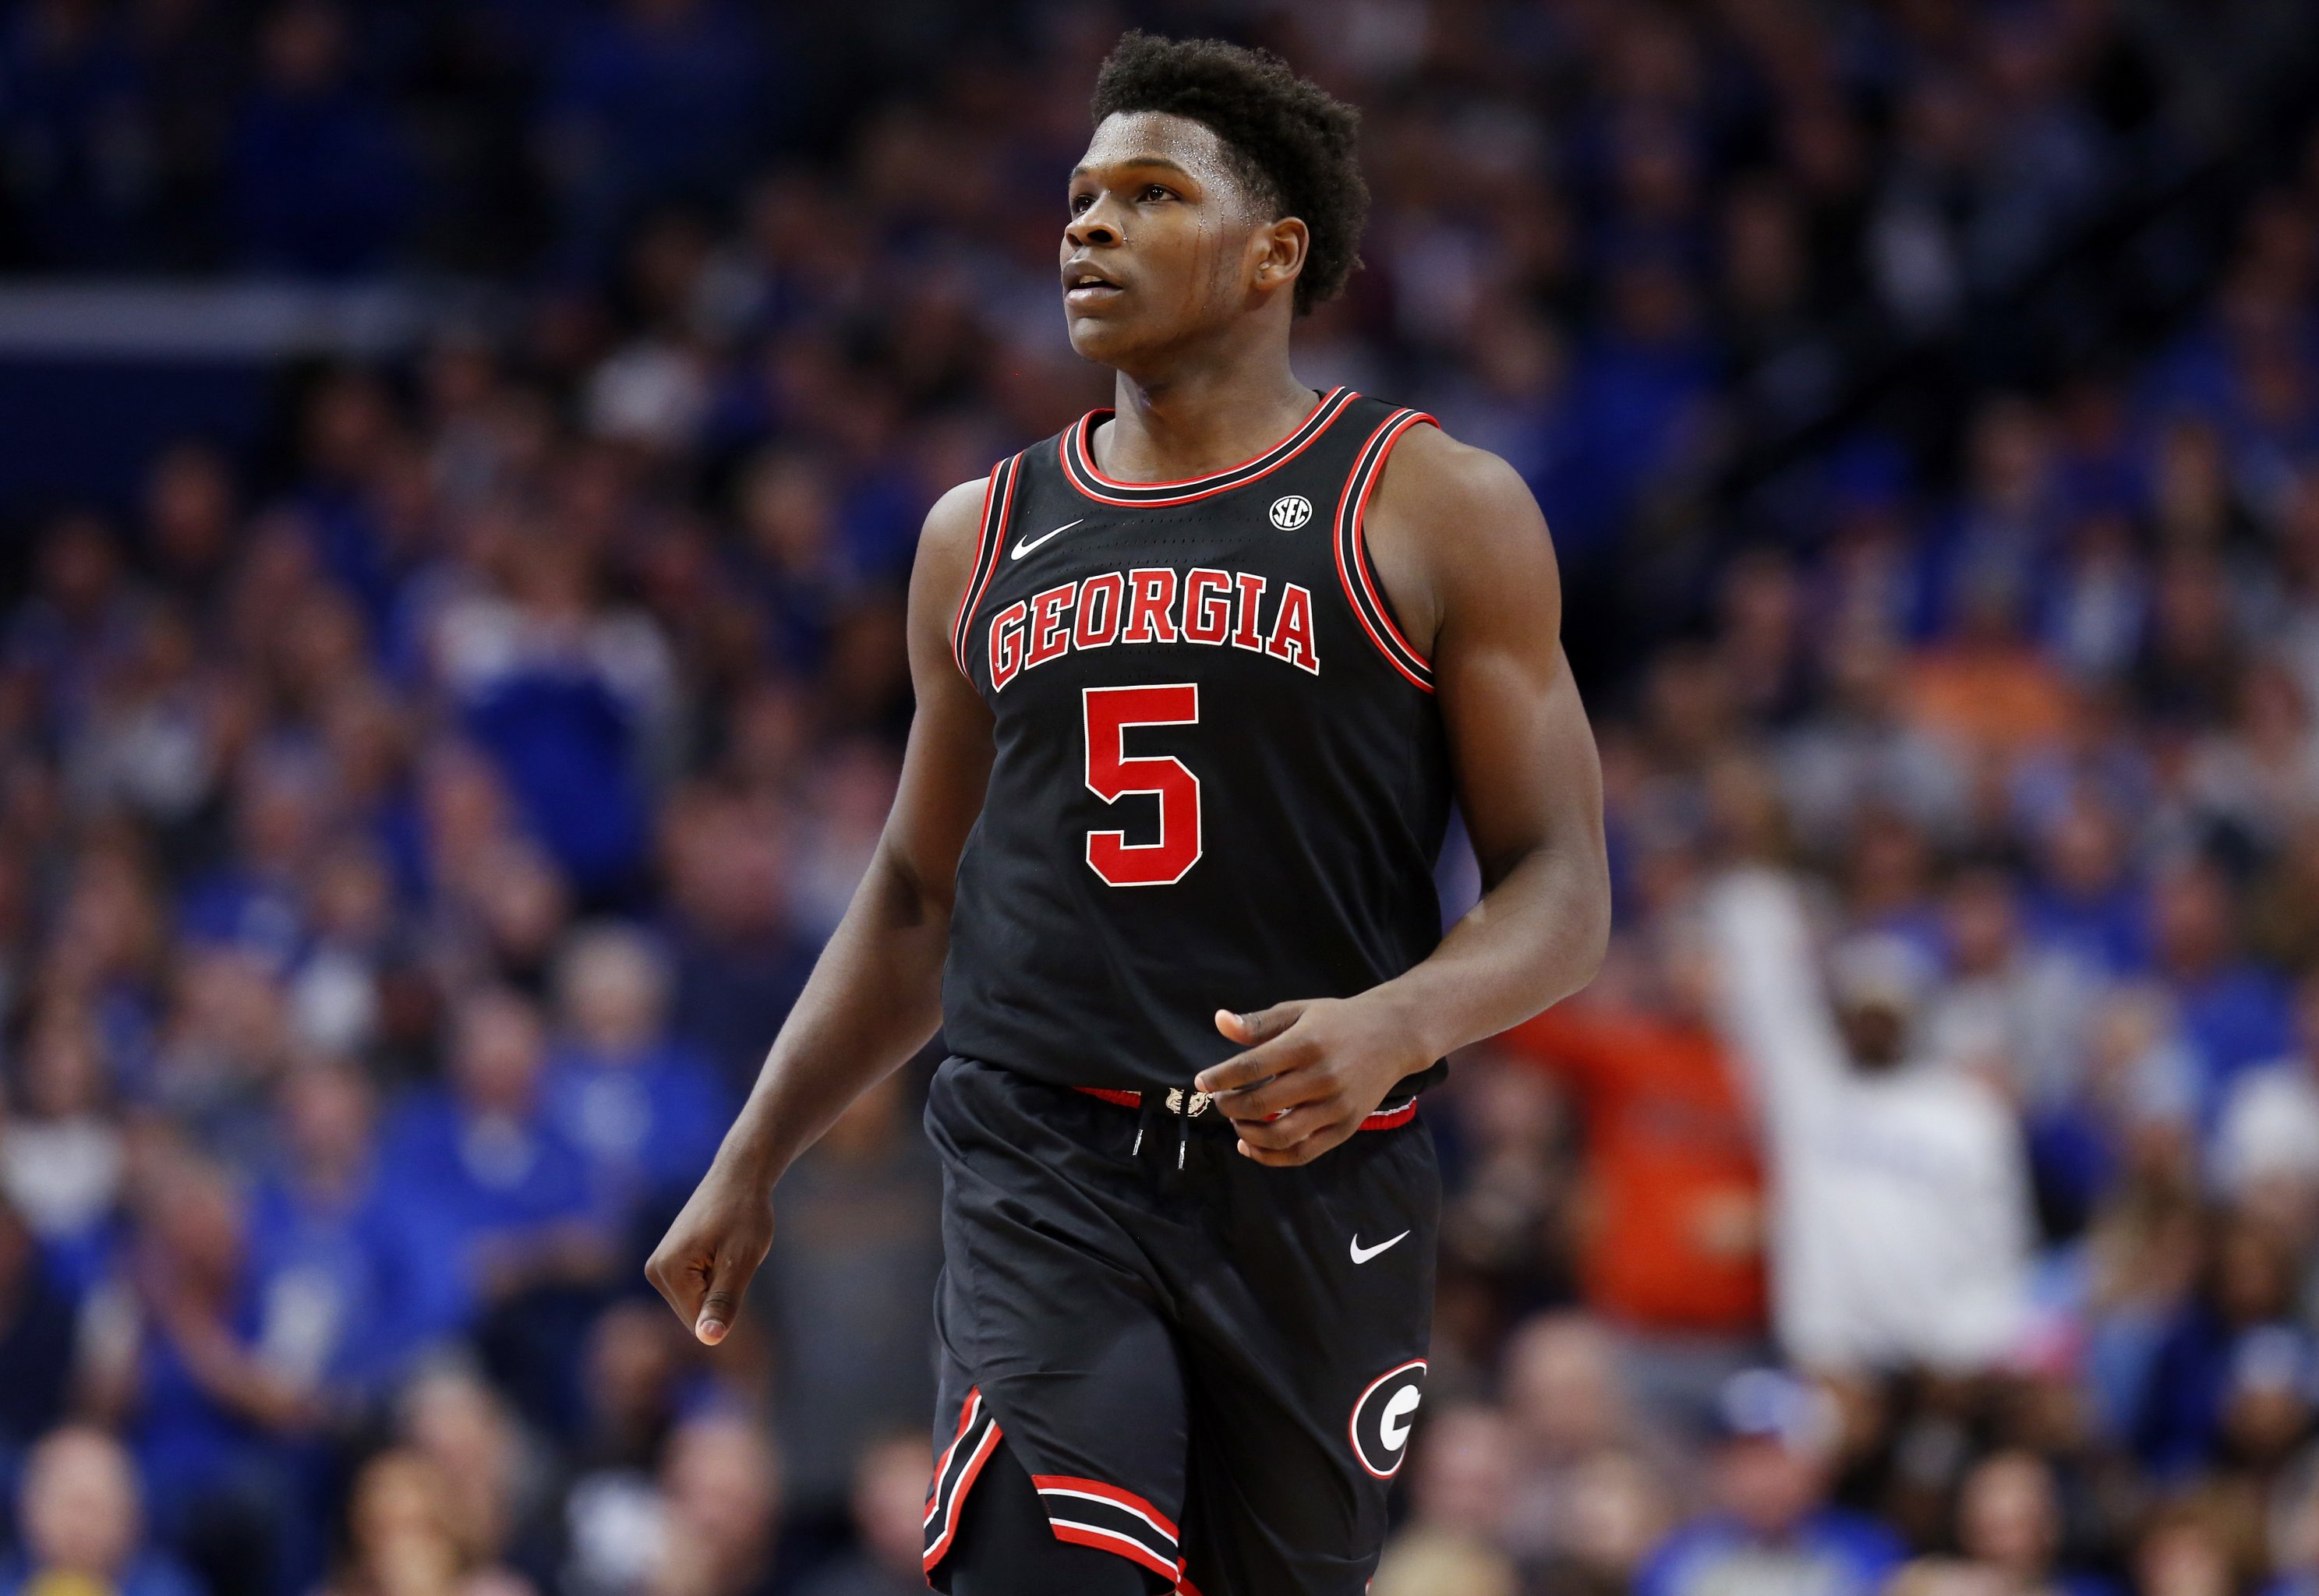 Exclusive interview with potential No. 1 NBA draft pick James Wiseman